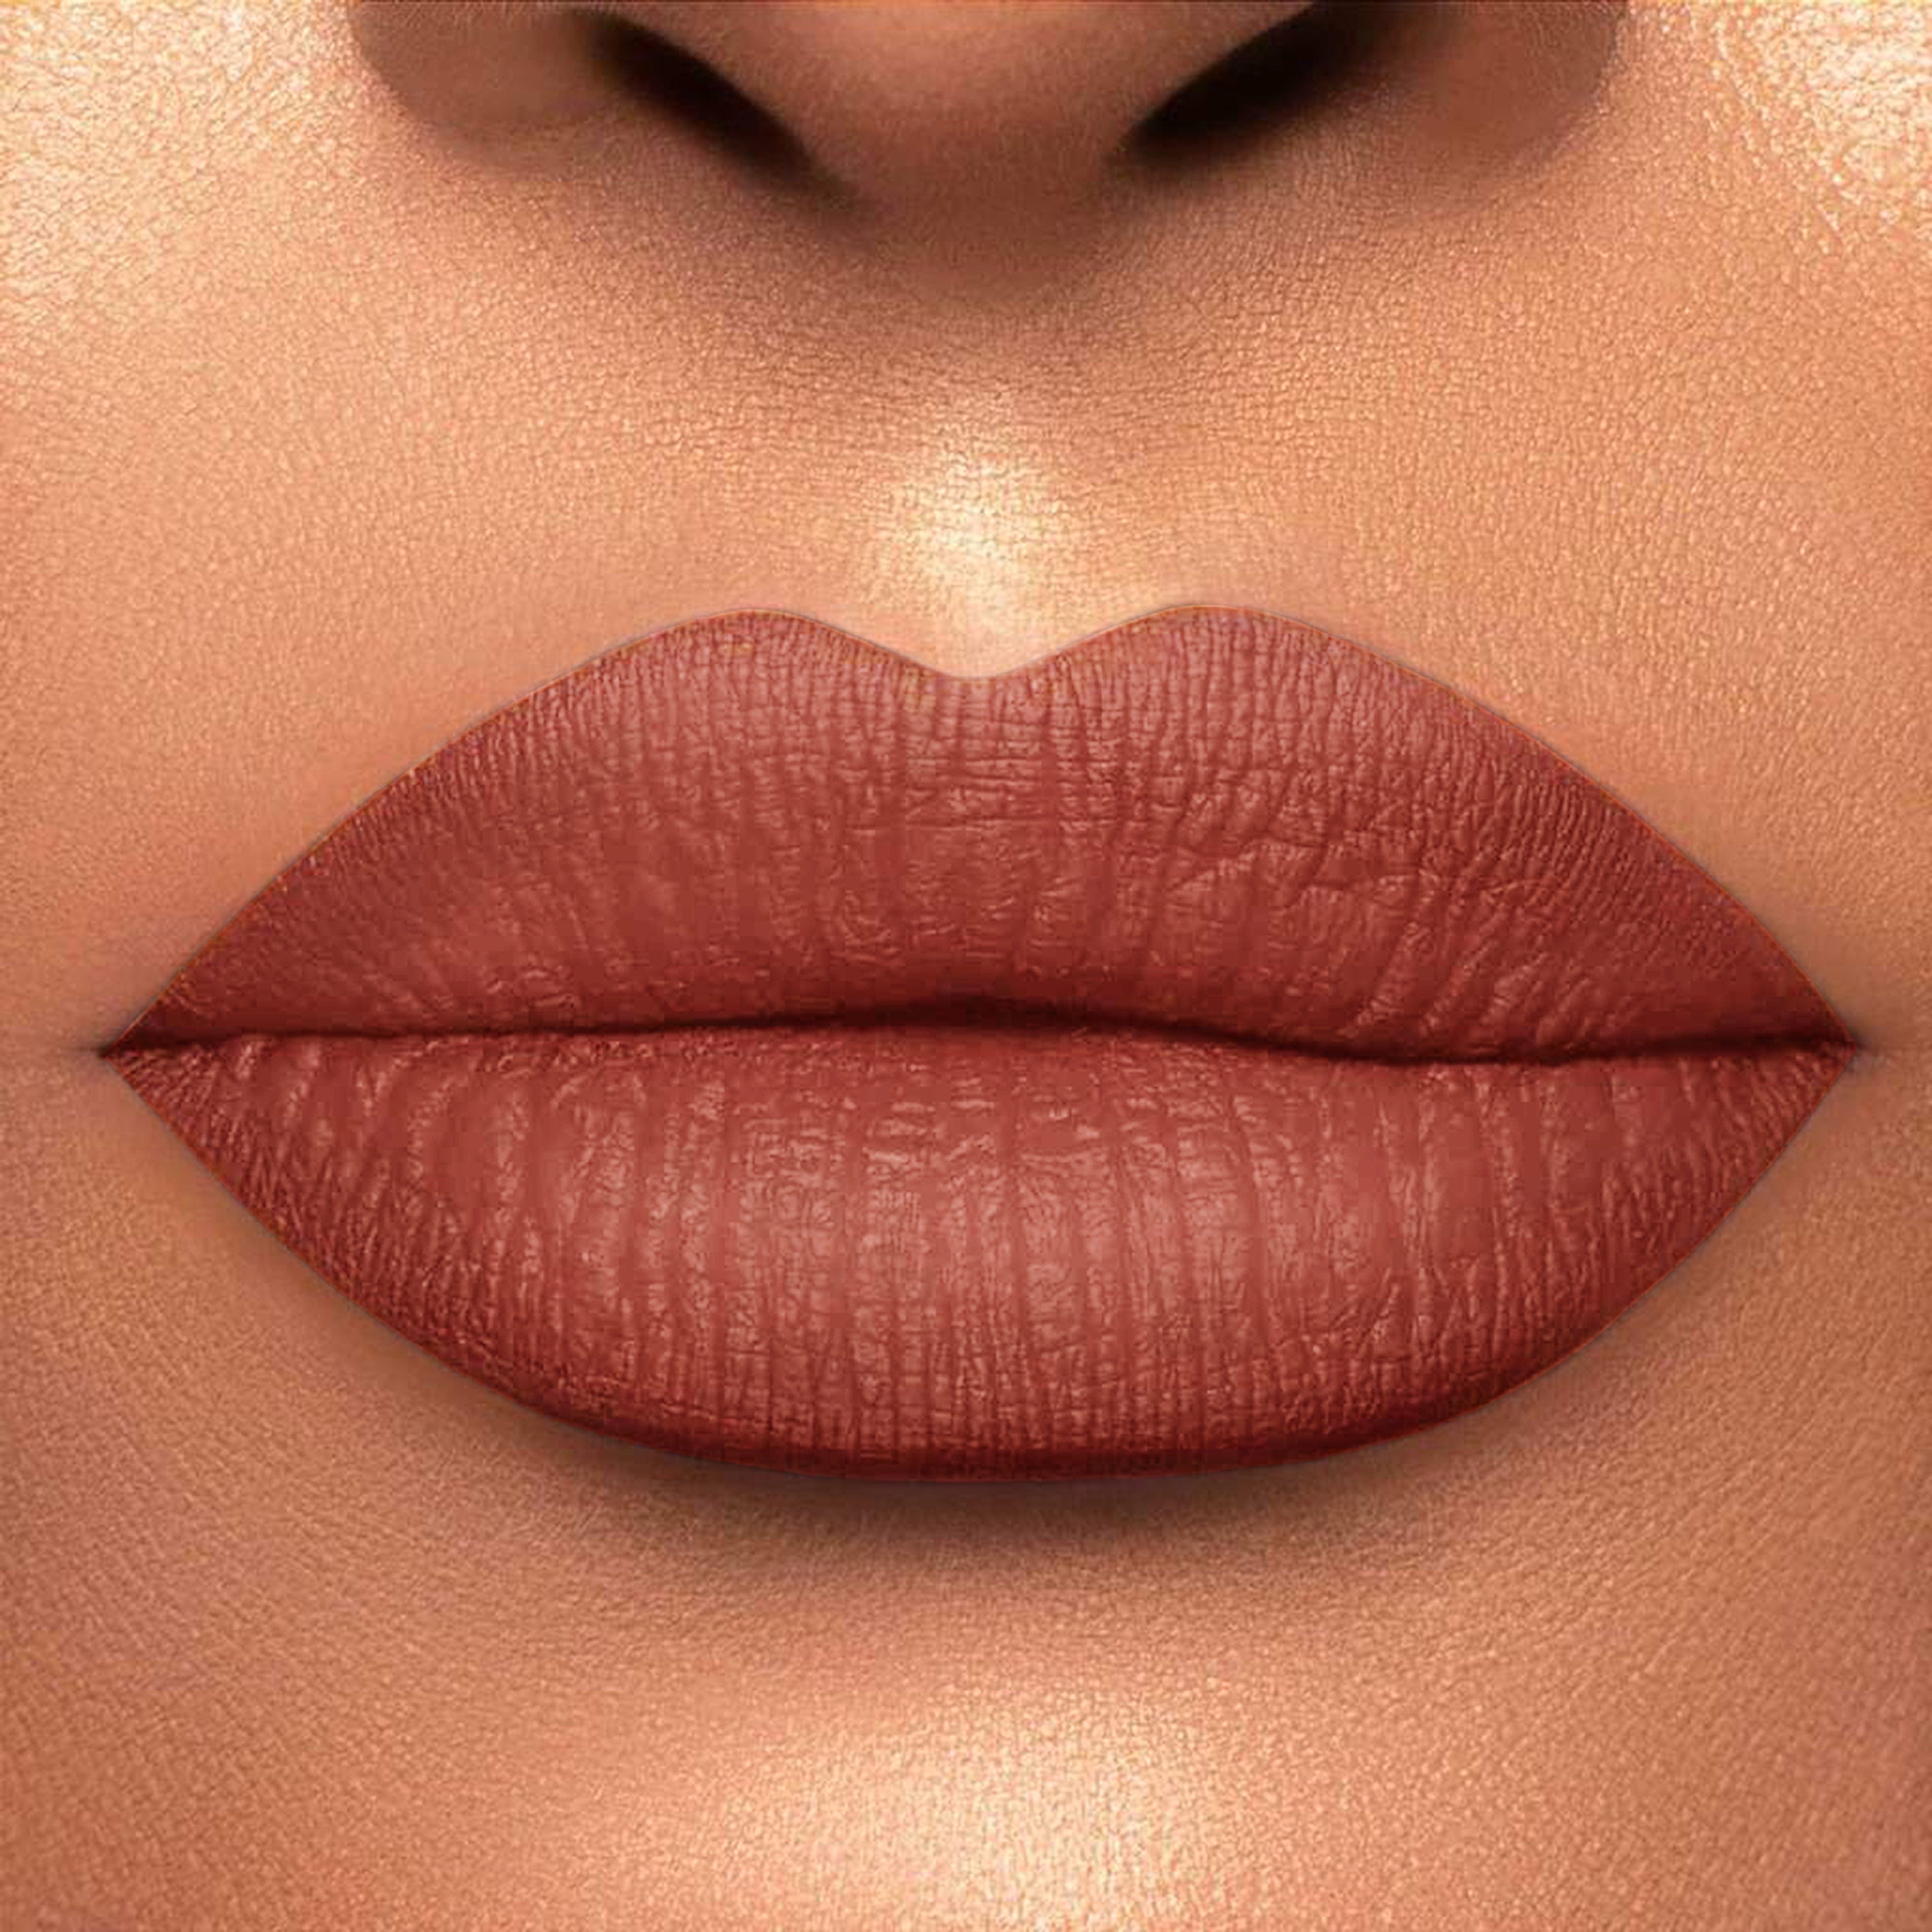 Boss Bih is a vegan mattifying lipstick that's made with quality ingredients for long-lasting color and comfort. With its oil-absorbing properties, it'll provide you